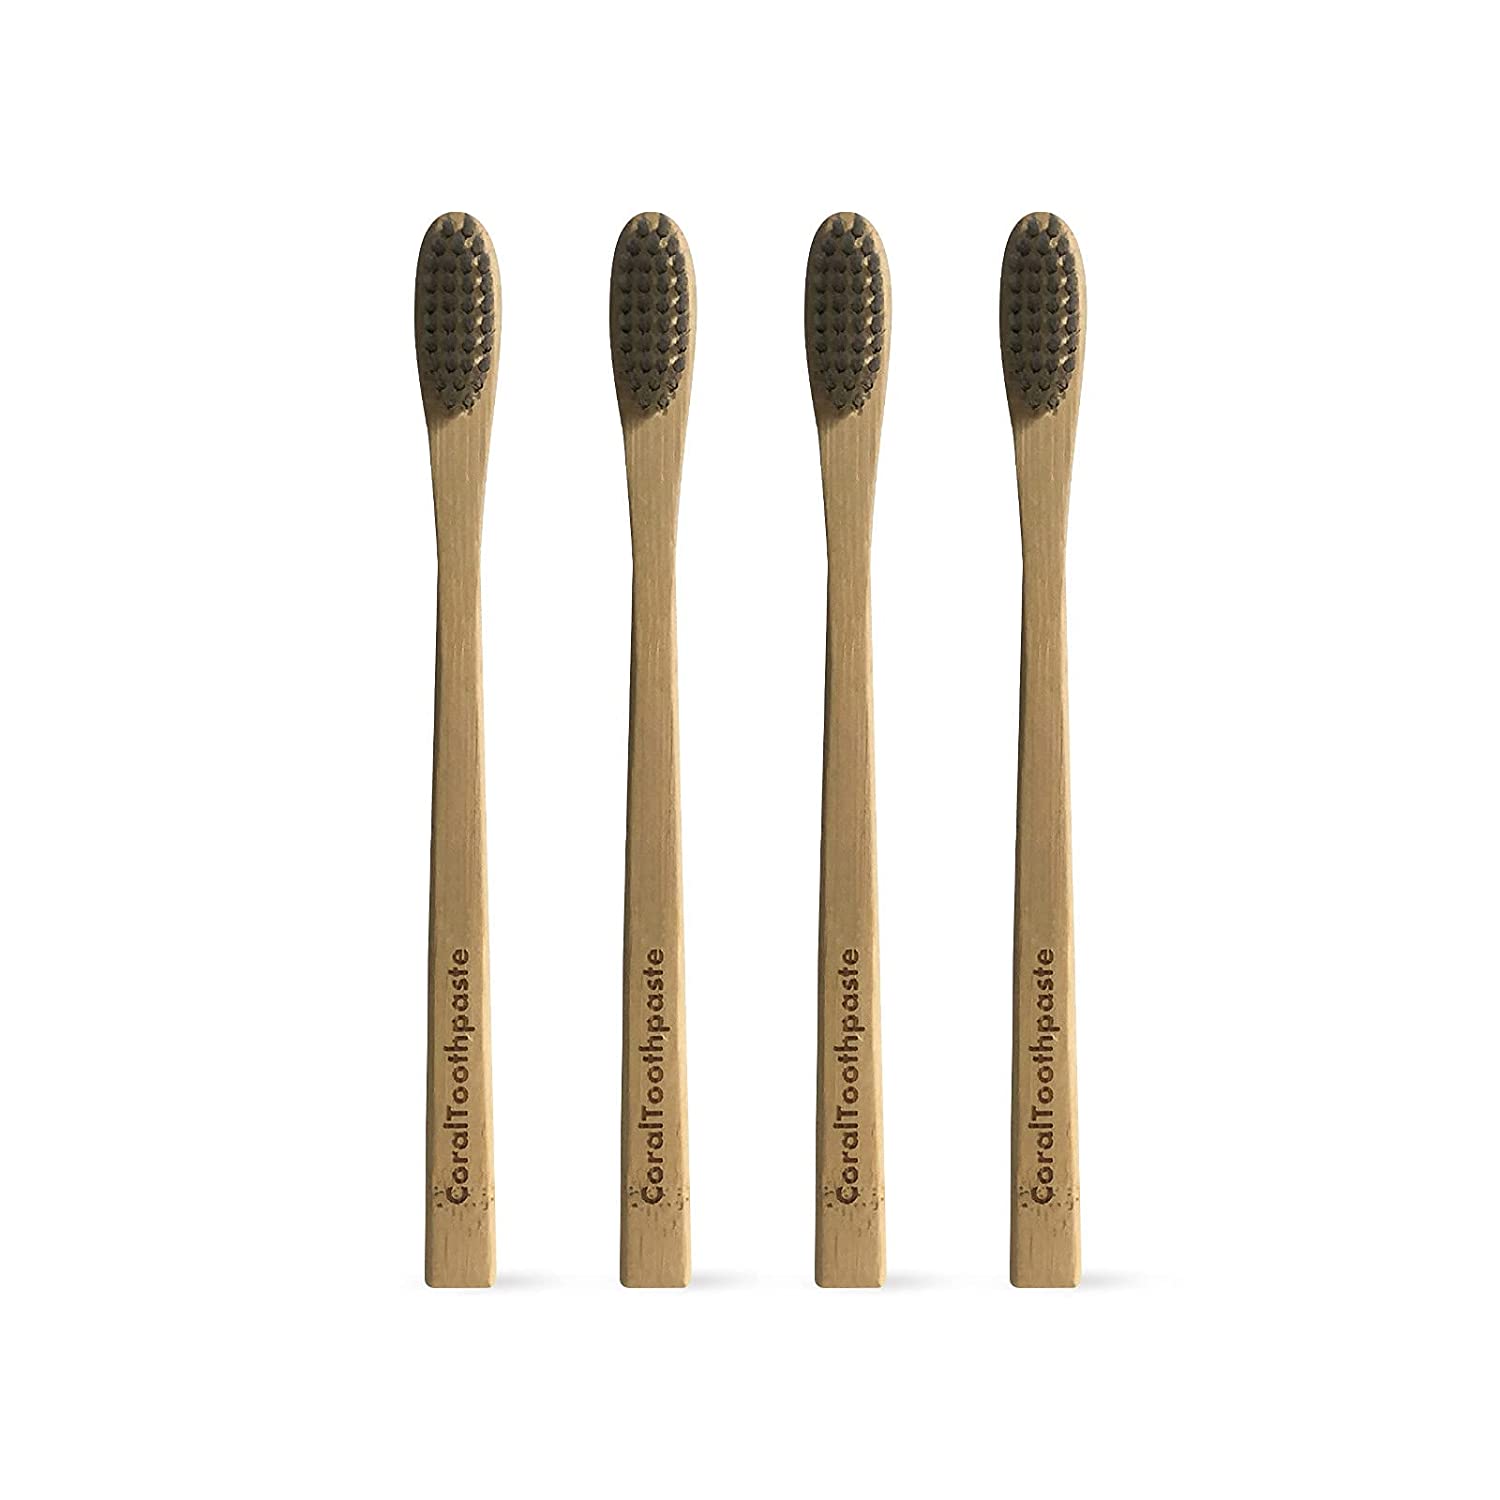 Eco-friendly Coral Toothpaste & Bamboo Toothbrush Combo - 4 Pack